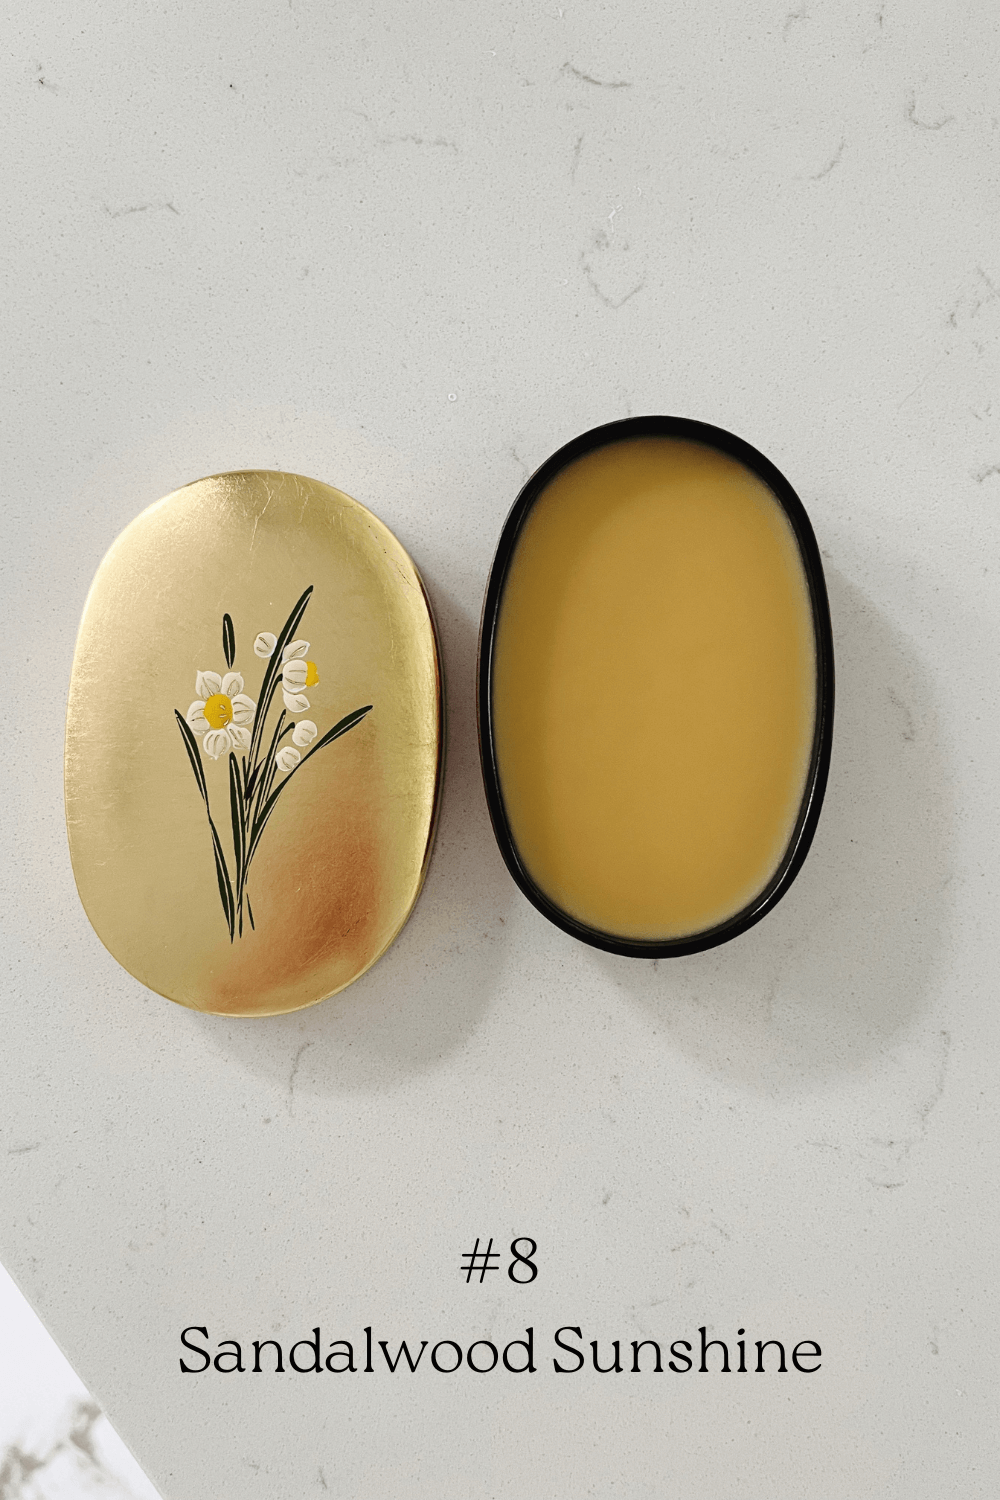 natural vegan solid perfume in vintage containers by twinkle apothecary